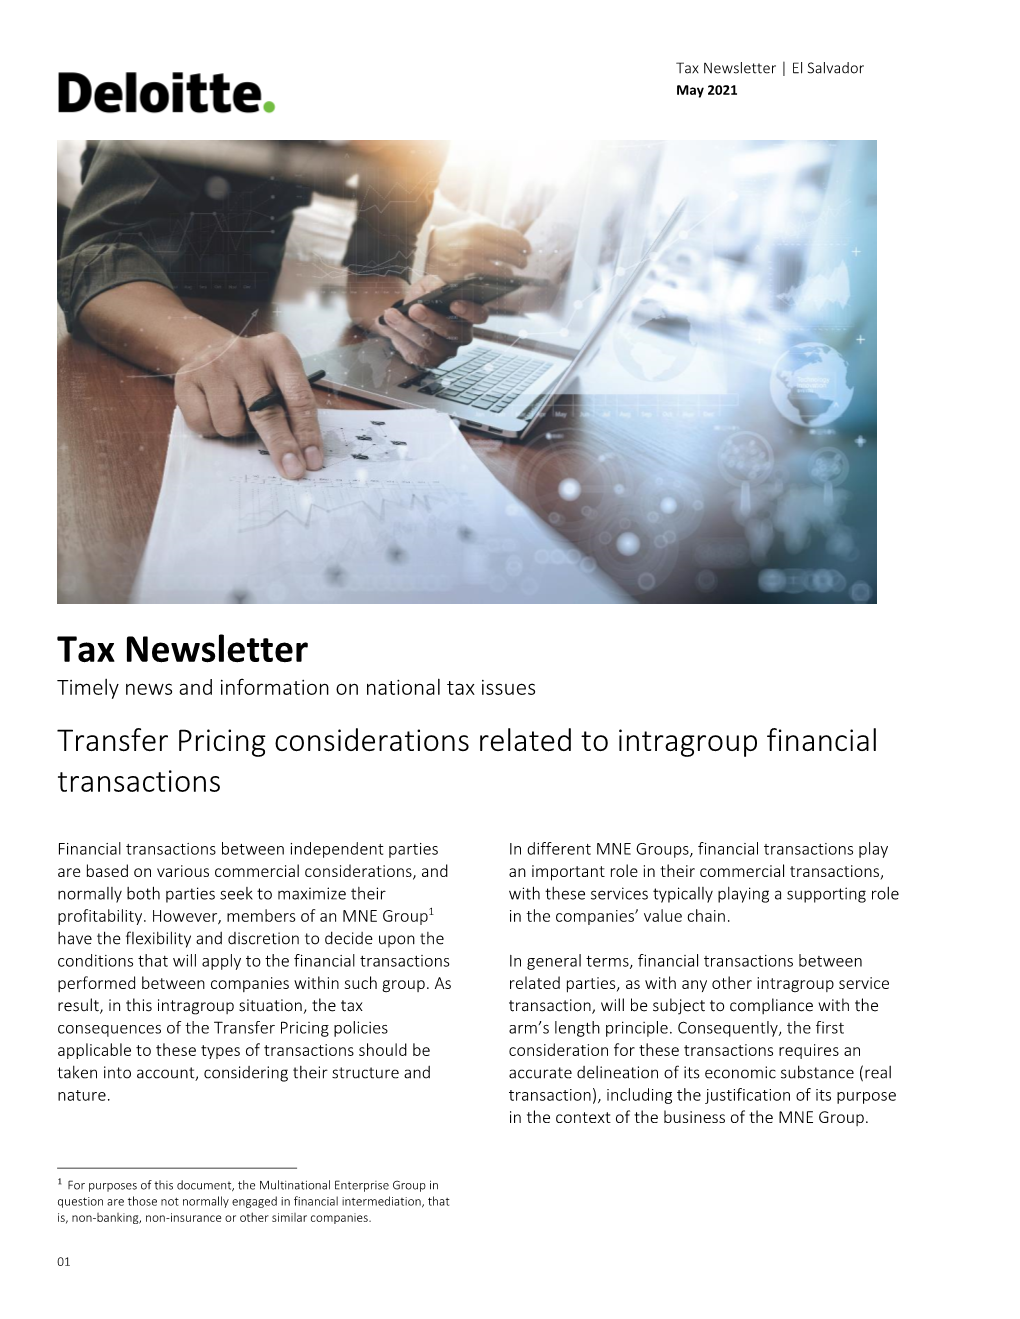 Tax Newsletter May 2021